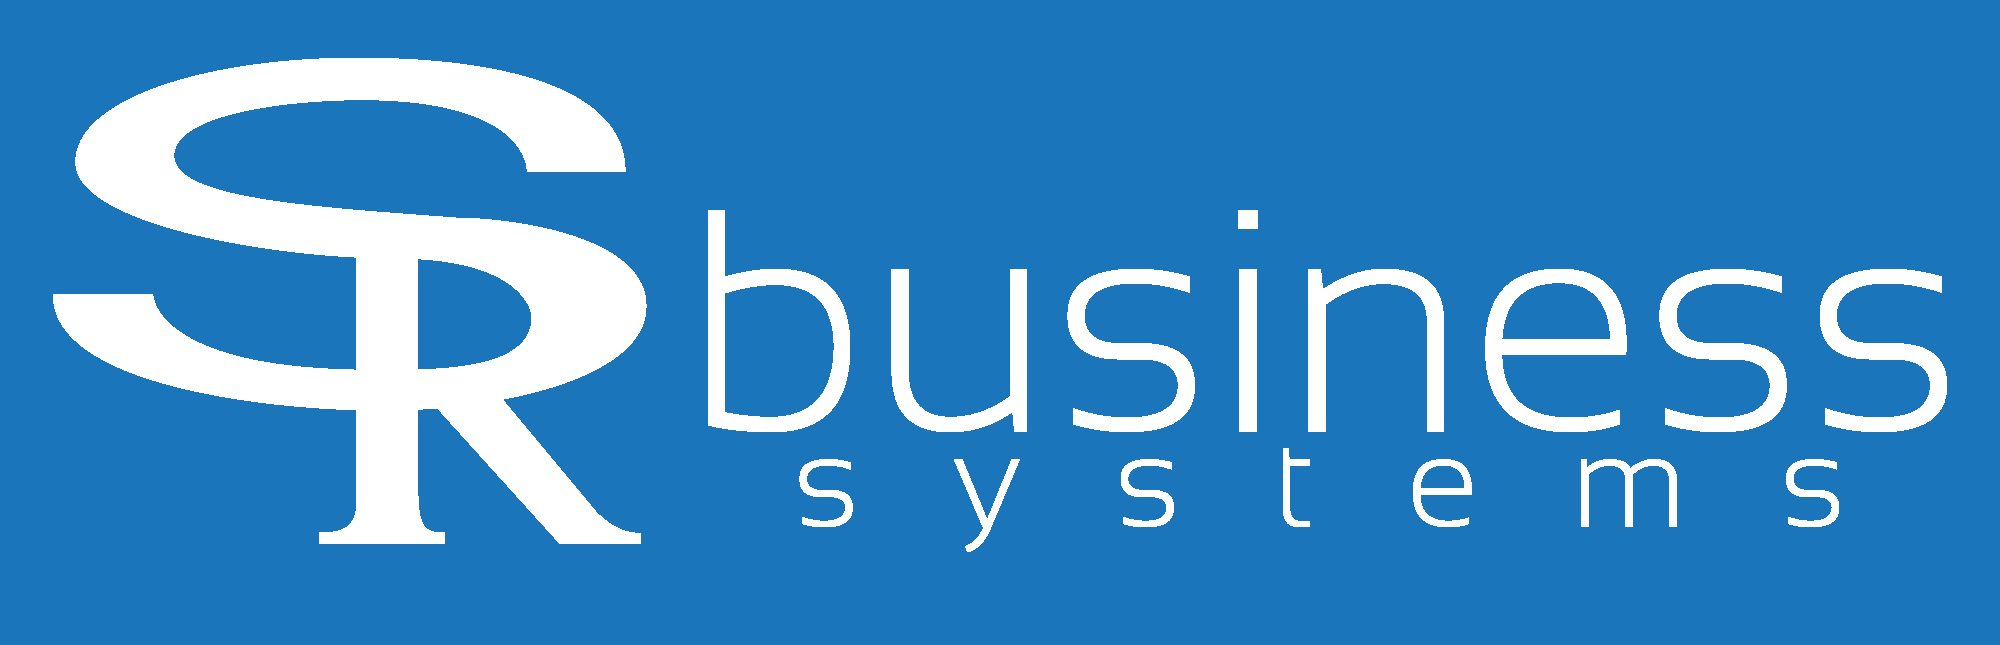 SR Business Systems